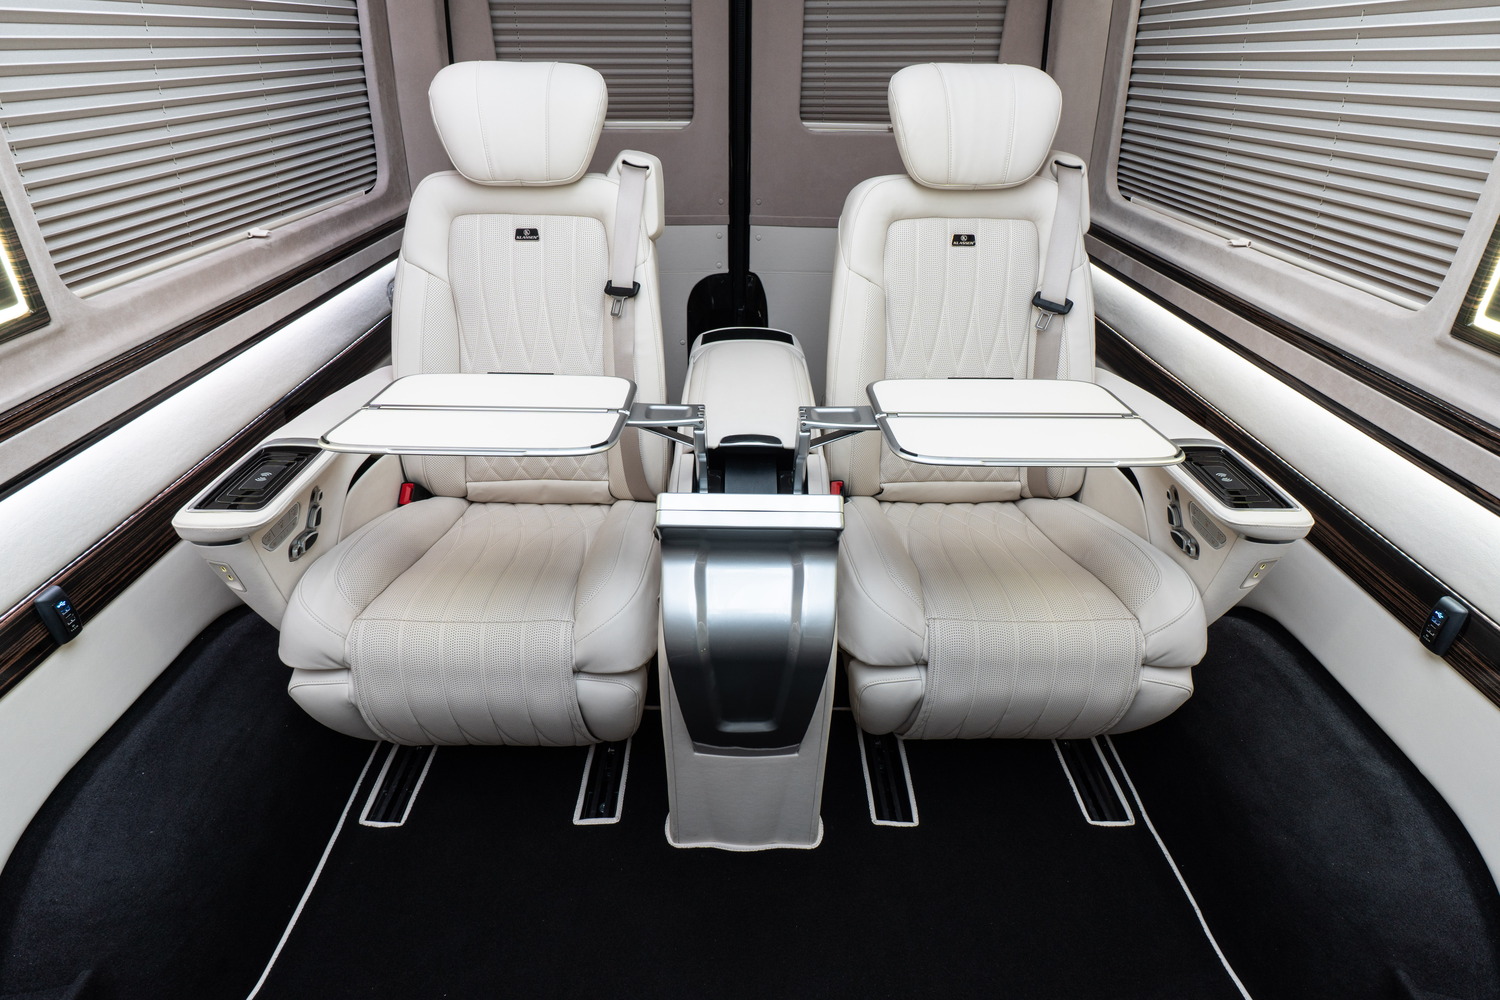 NOW Available Luxury VIP Vans! Exclusive noble Conversions.